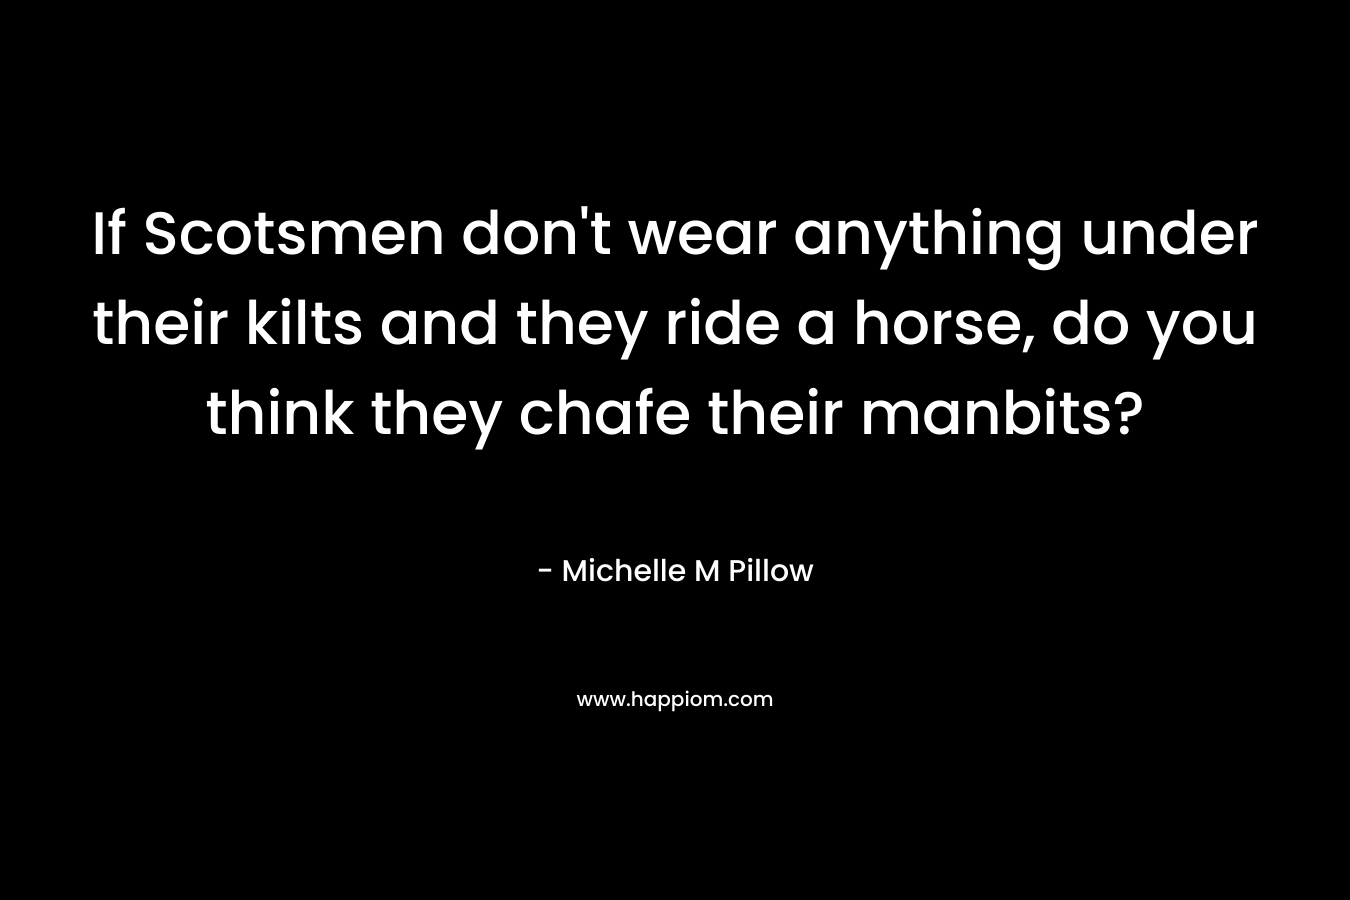 If Scotsmen don't wear anything under their kilts and they ride a horse, do you think they chafe their manbits?